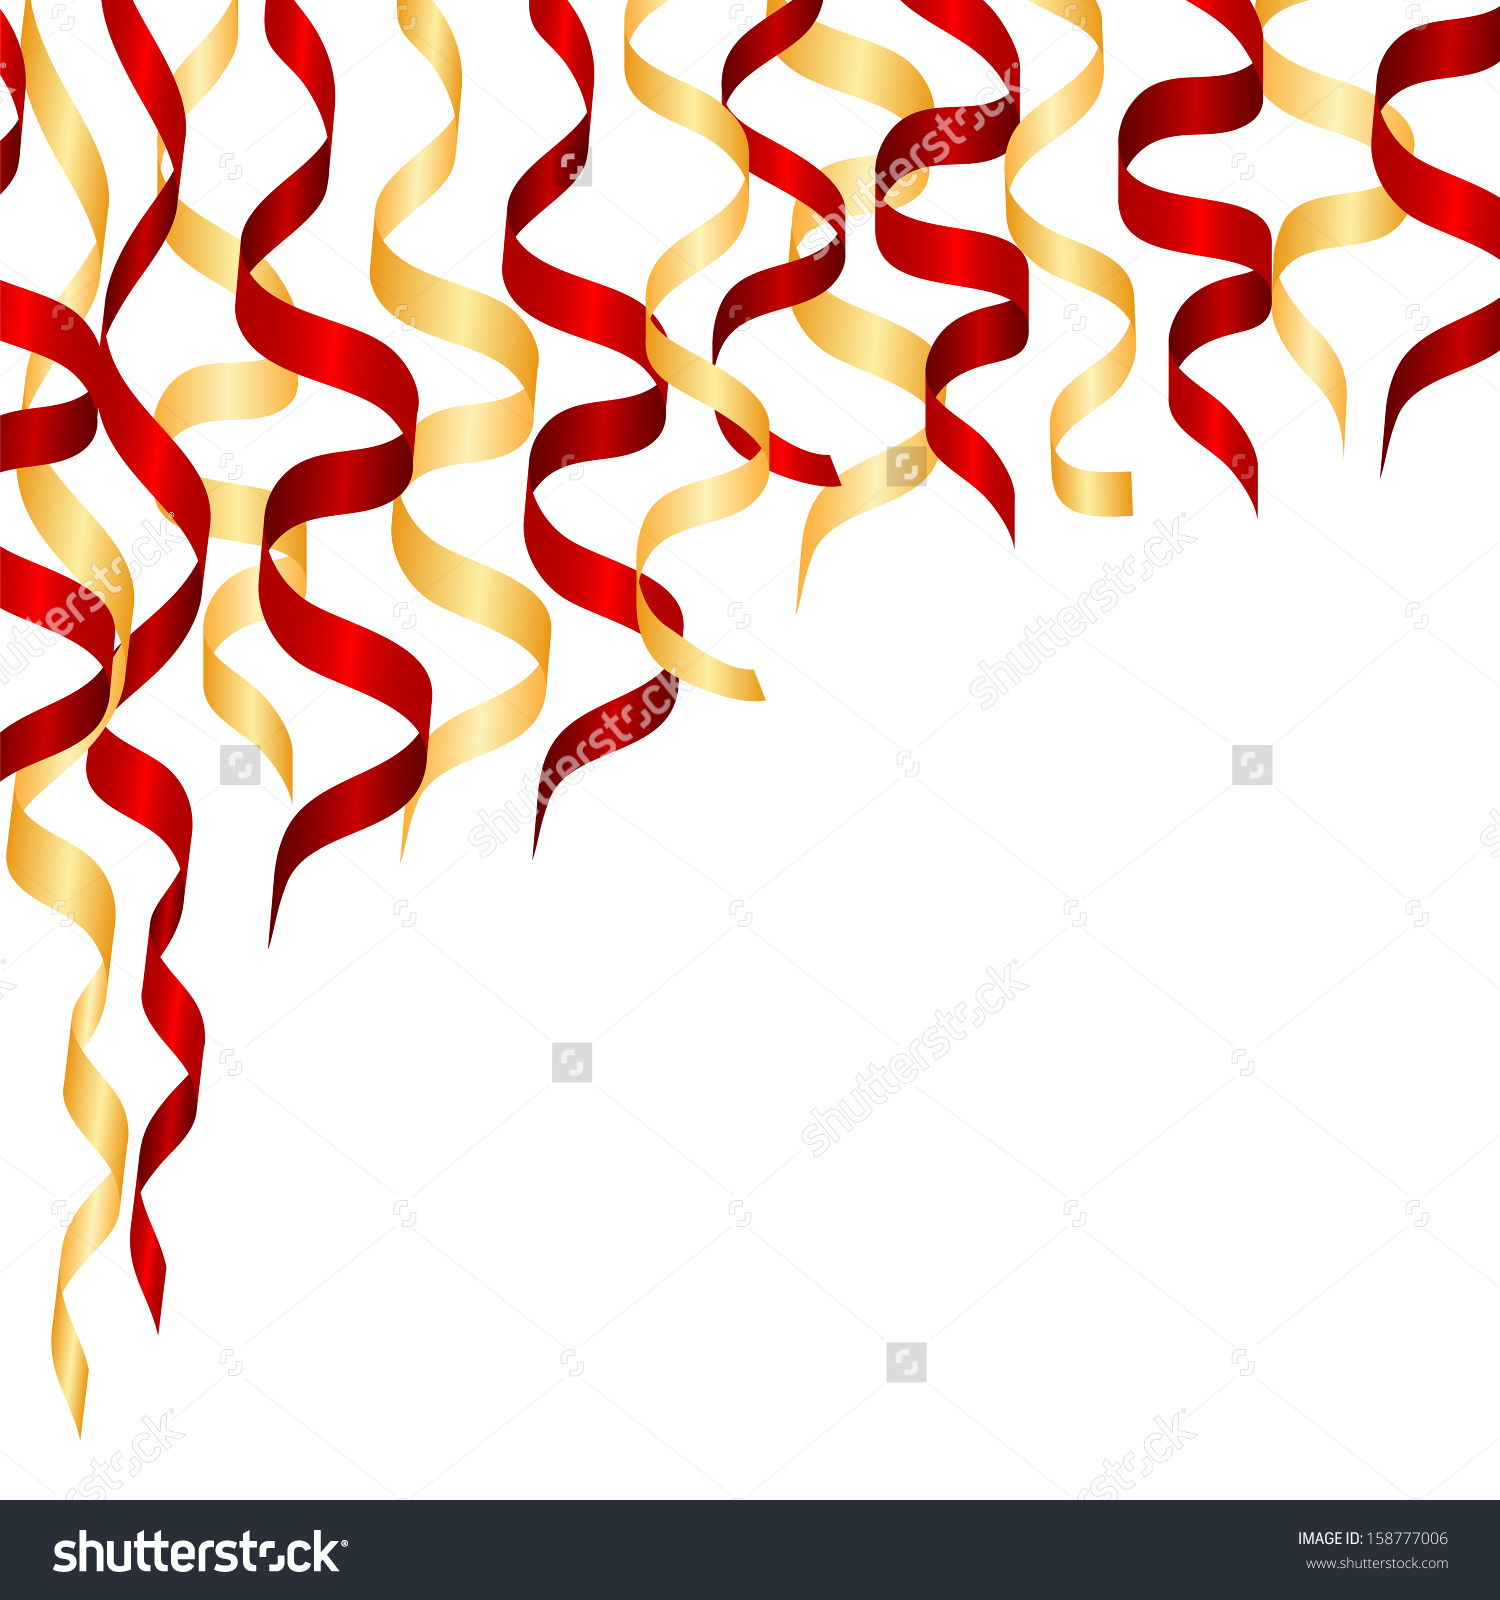 streamers clipart gold streamer